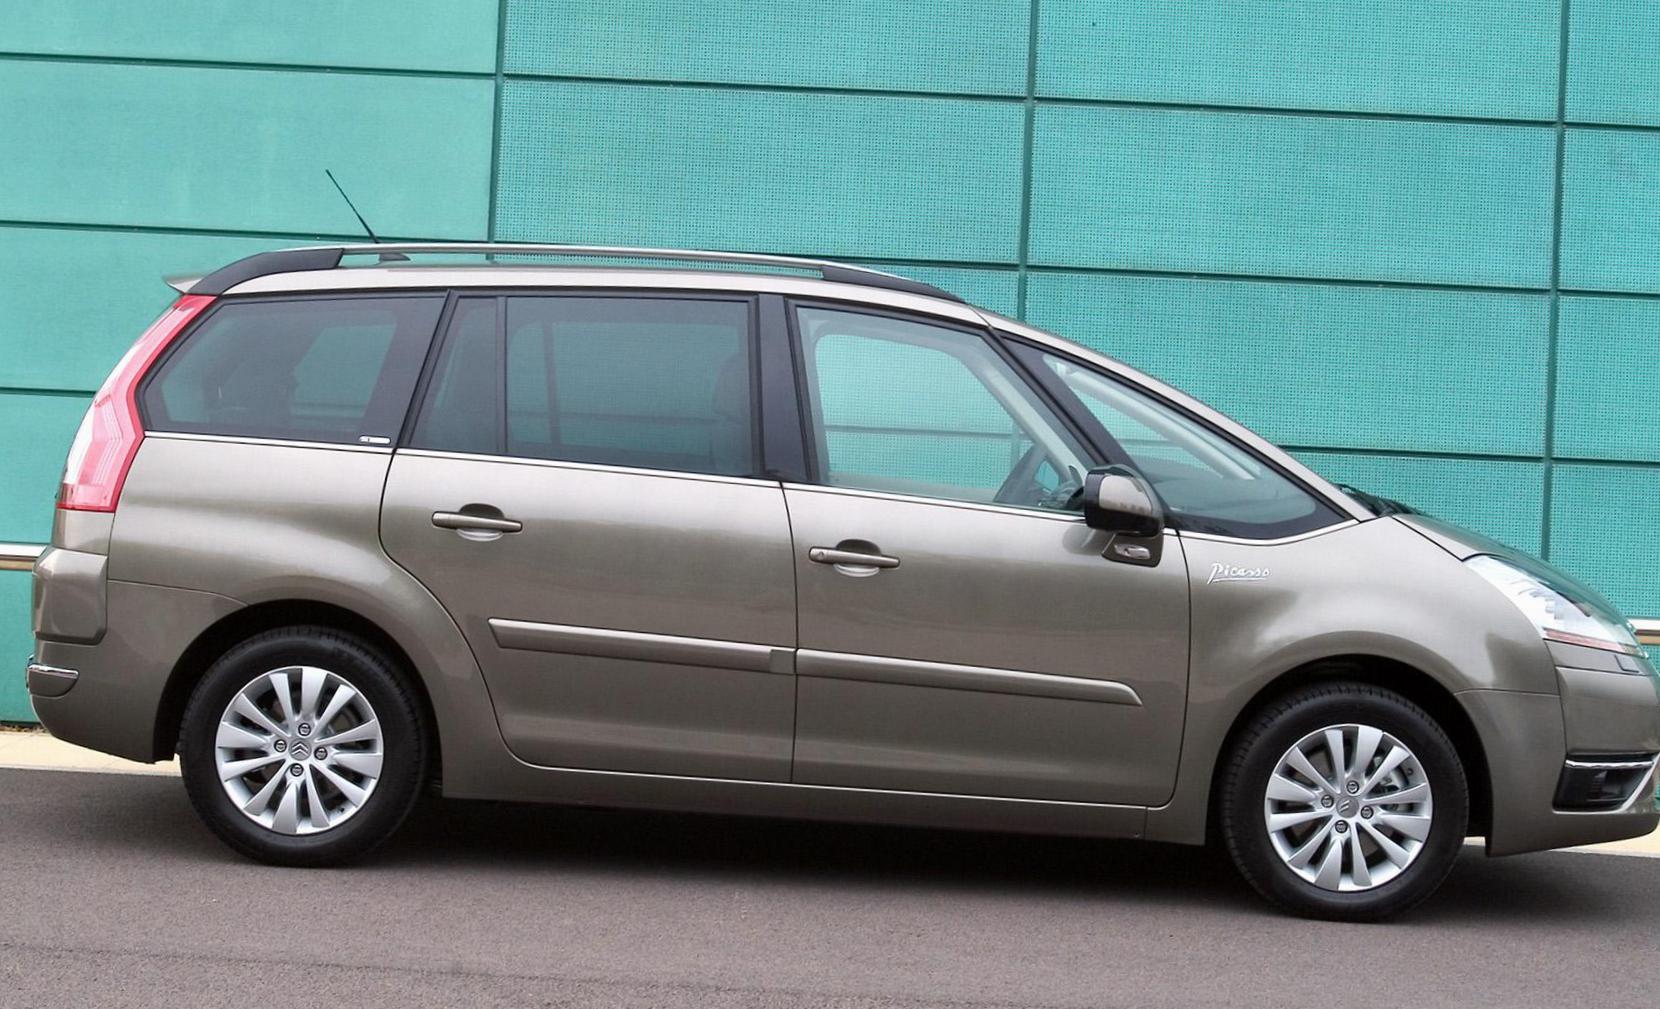 Grand C4 Picasso Citroen approved 2009